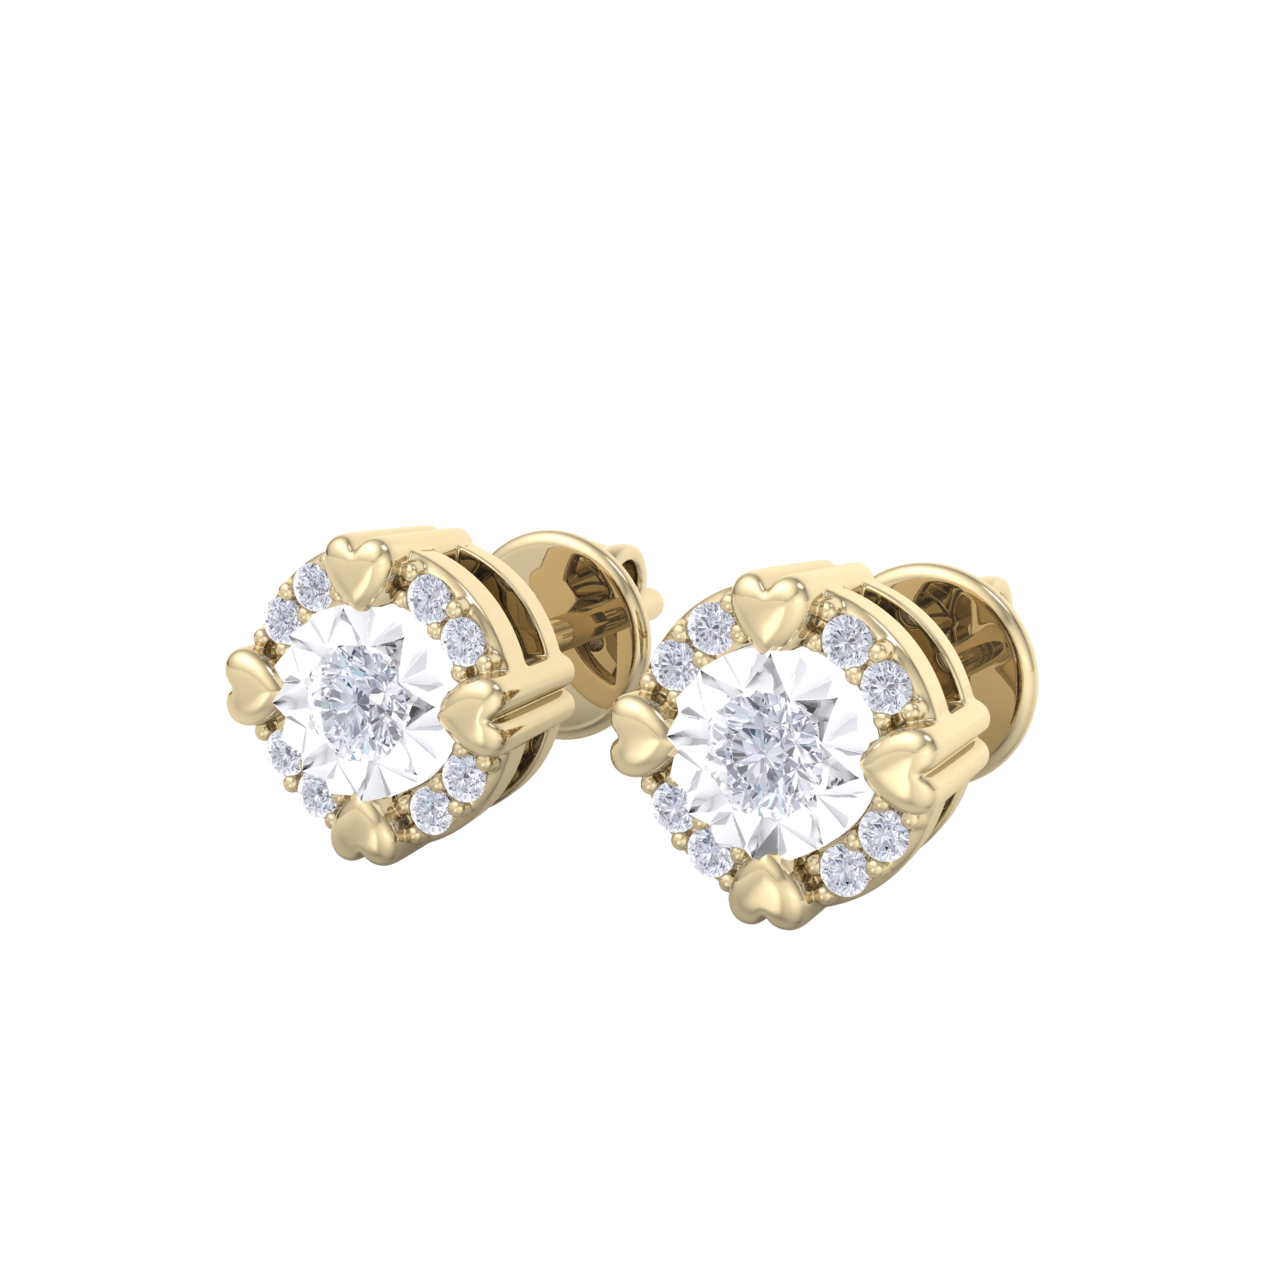 Halo earrings with miracle plate in yellow gold with white diamonds of 0.20 ct in weight